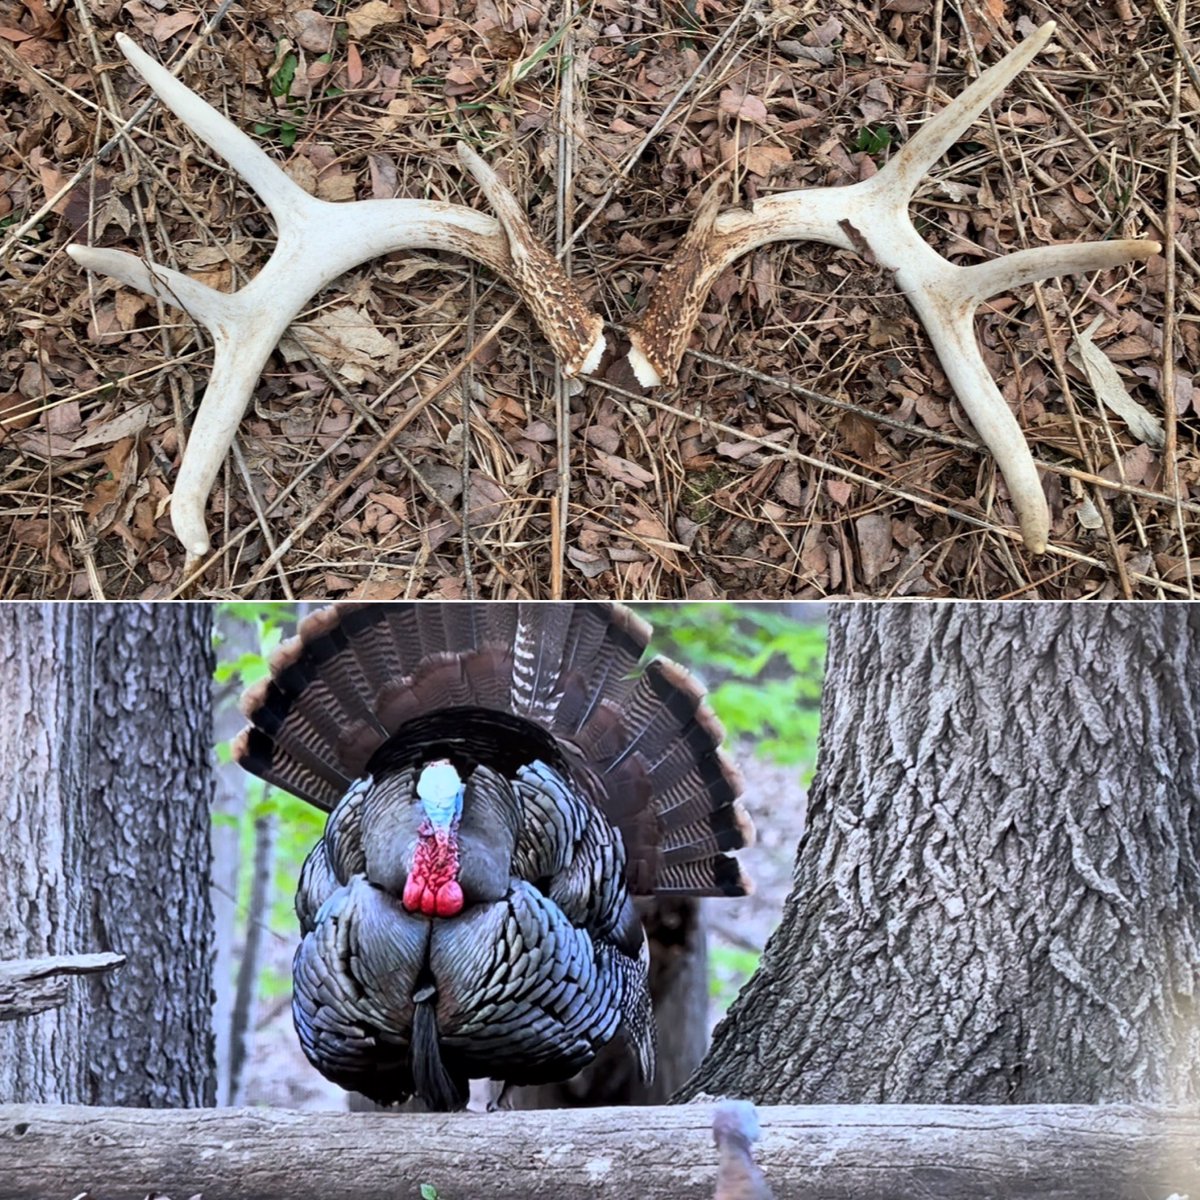 Which you lookin forward too more?! Stompin ground lookin for sheds or gettin after a gobbler or two?!

#shedseason #springiscoming #turkeyhunting